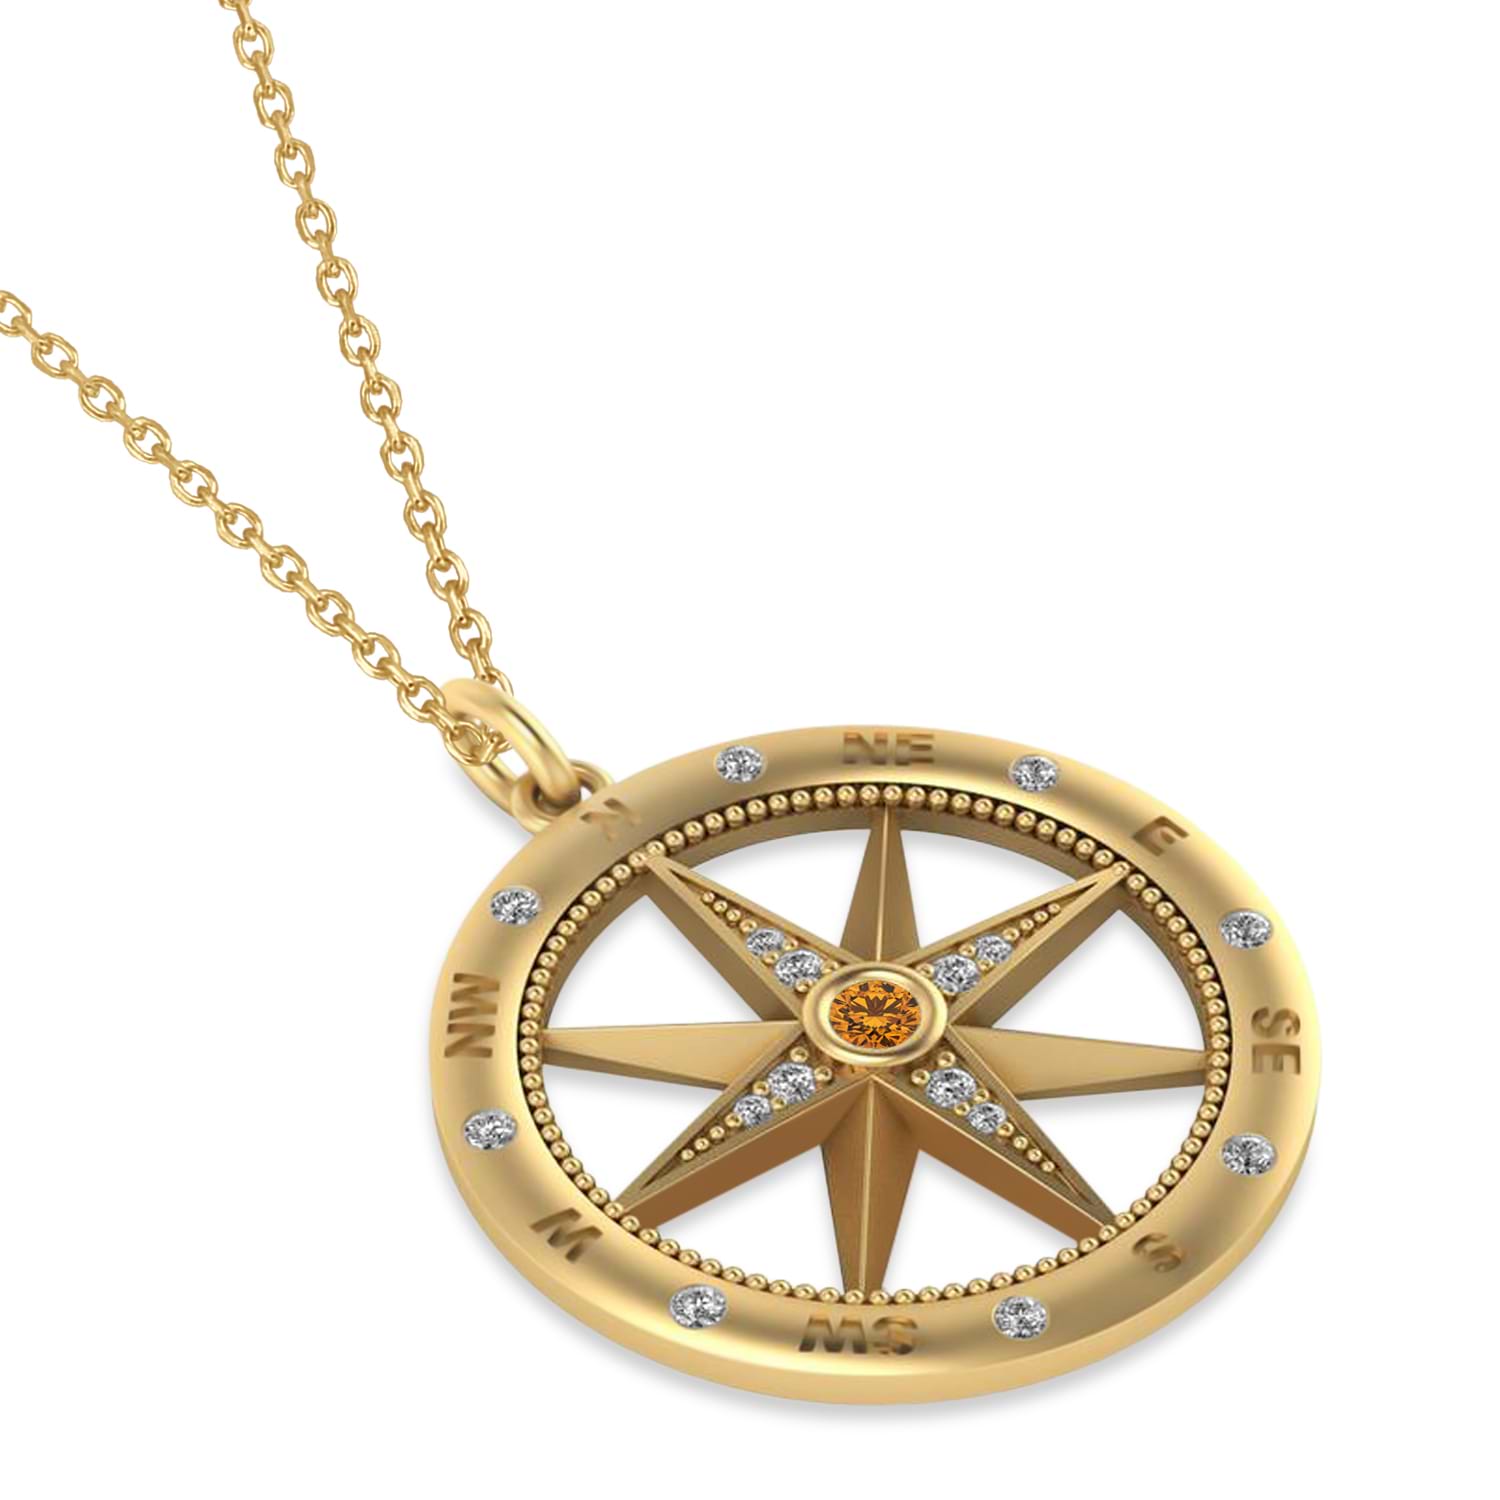 Large Compass Pendant For Men Citrine & Diamond Accented 14k Yellow Gold (0.38ct)